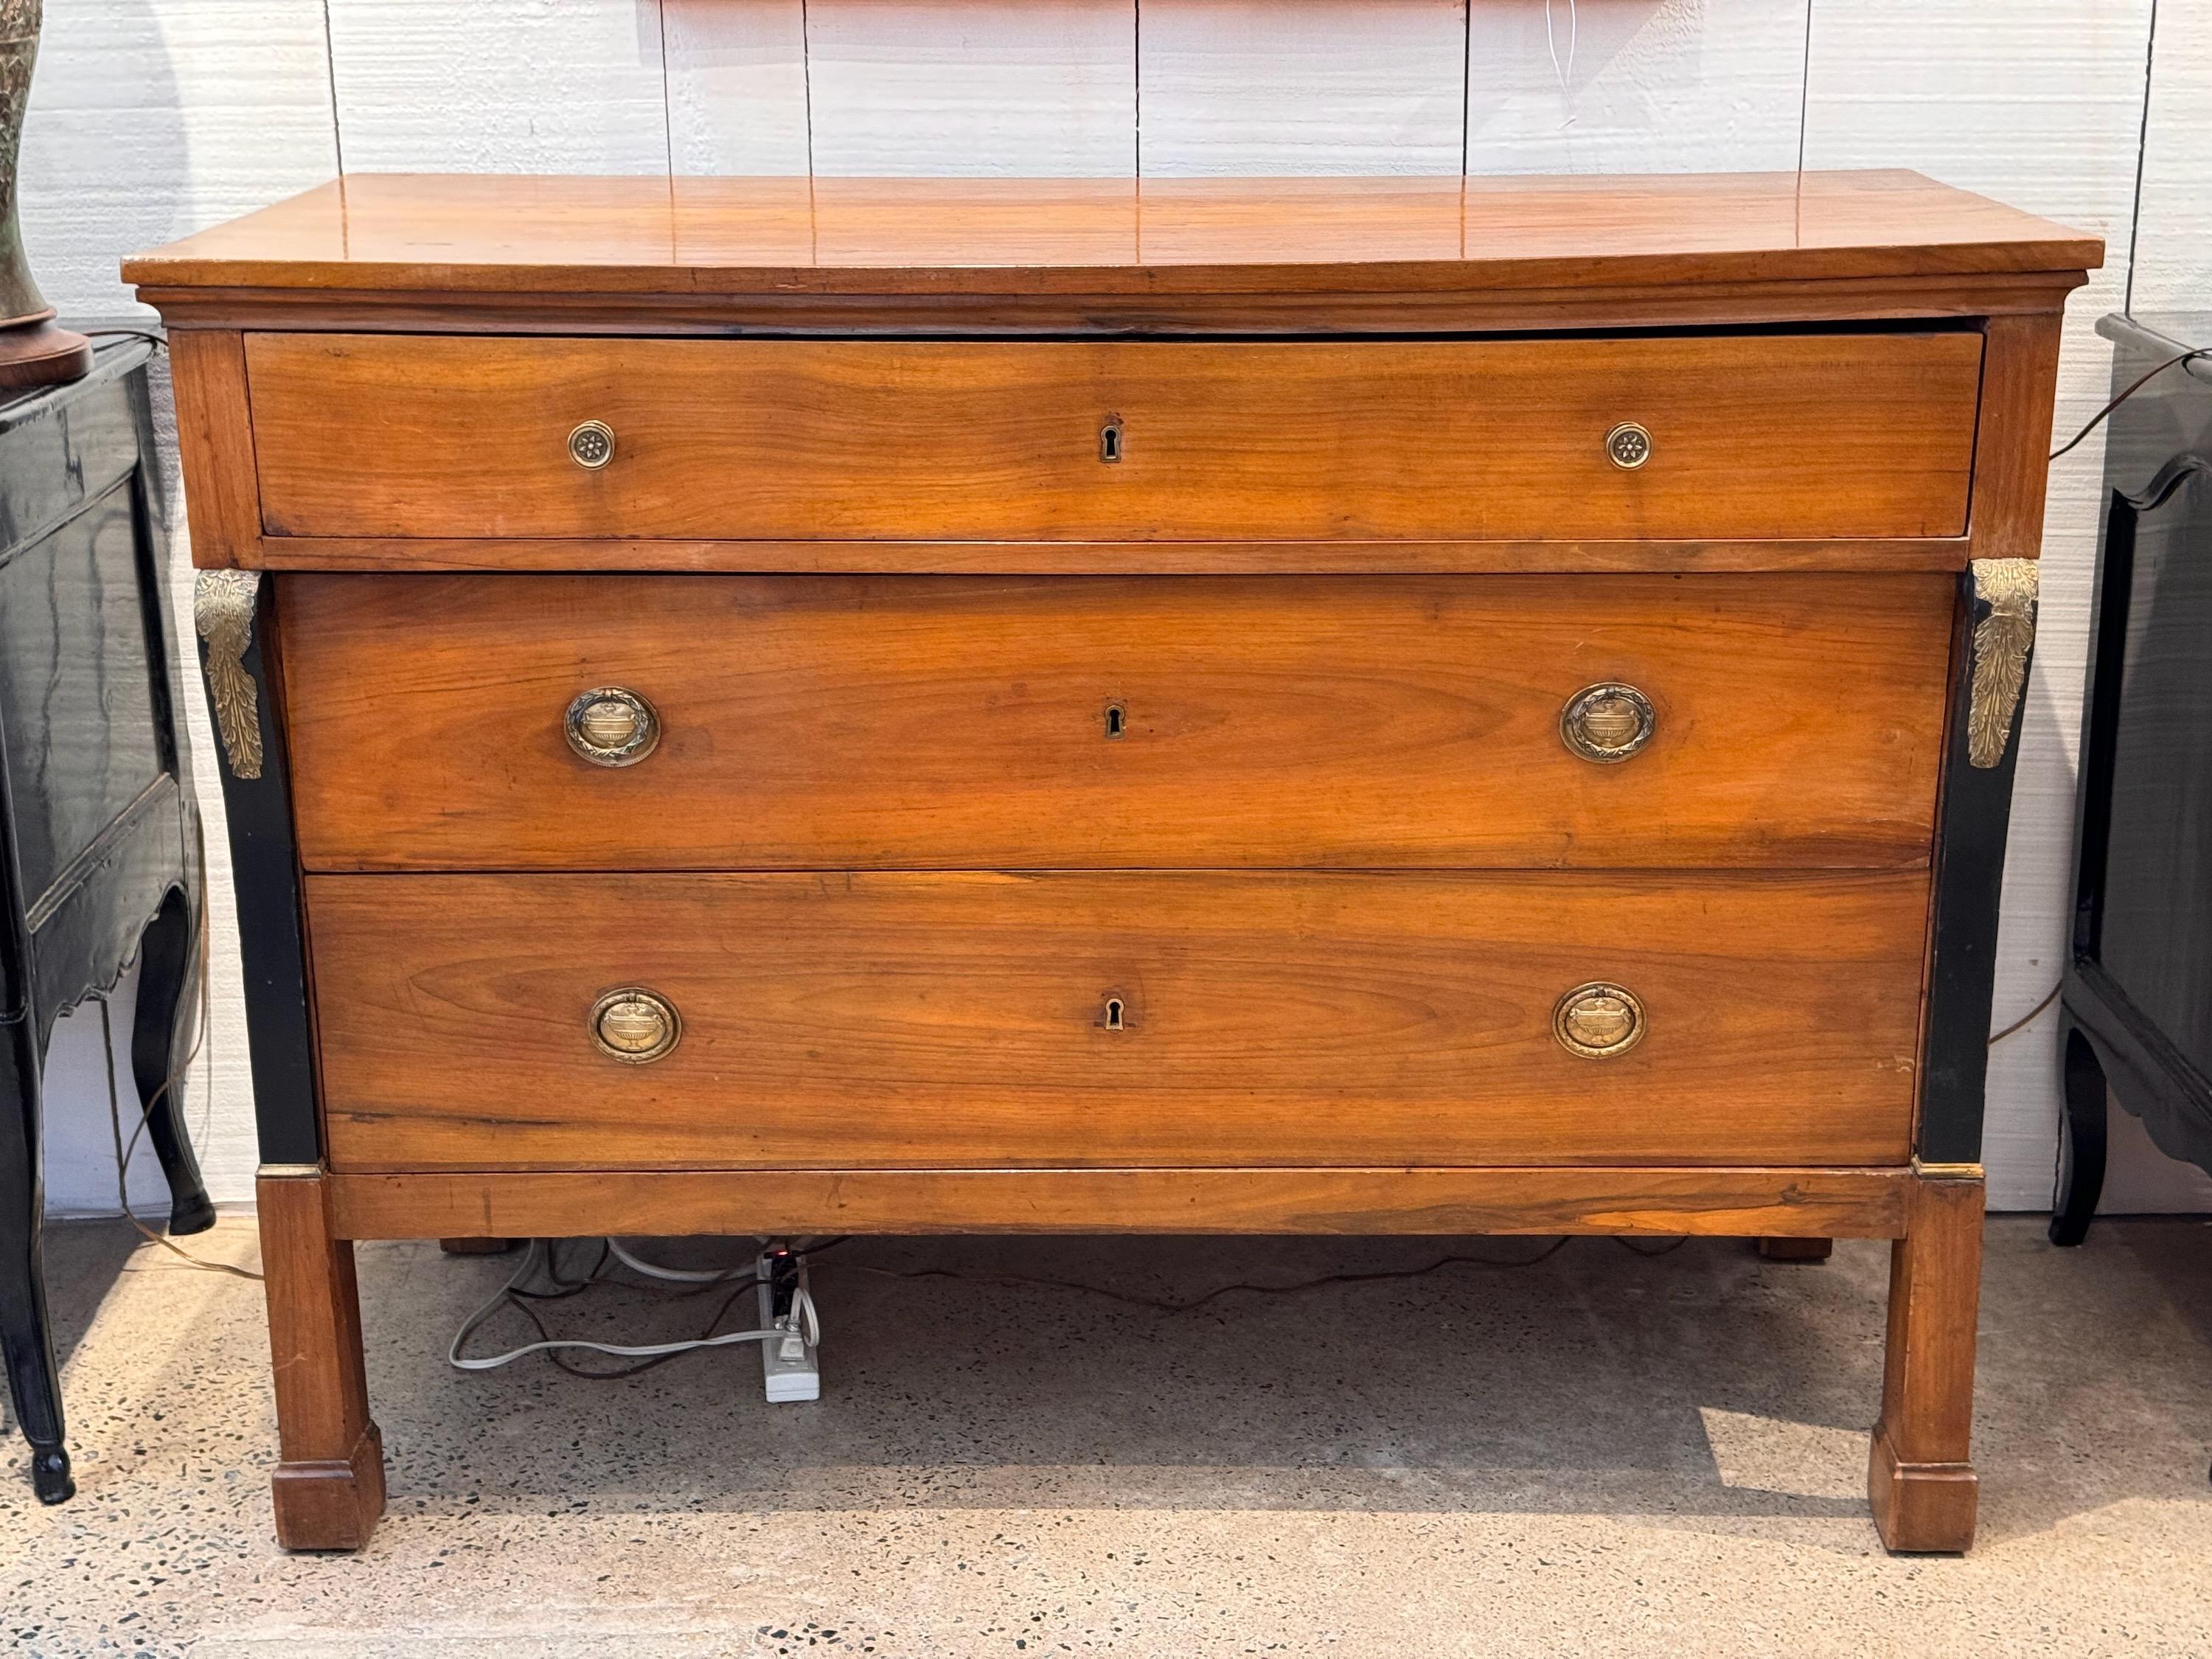 This tall, handsome chest is so beautiful. Would look great in any room.